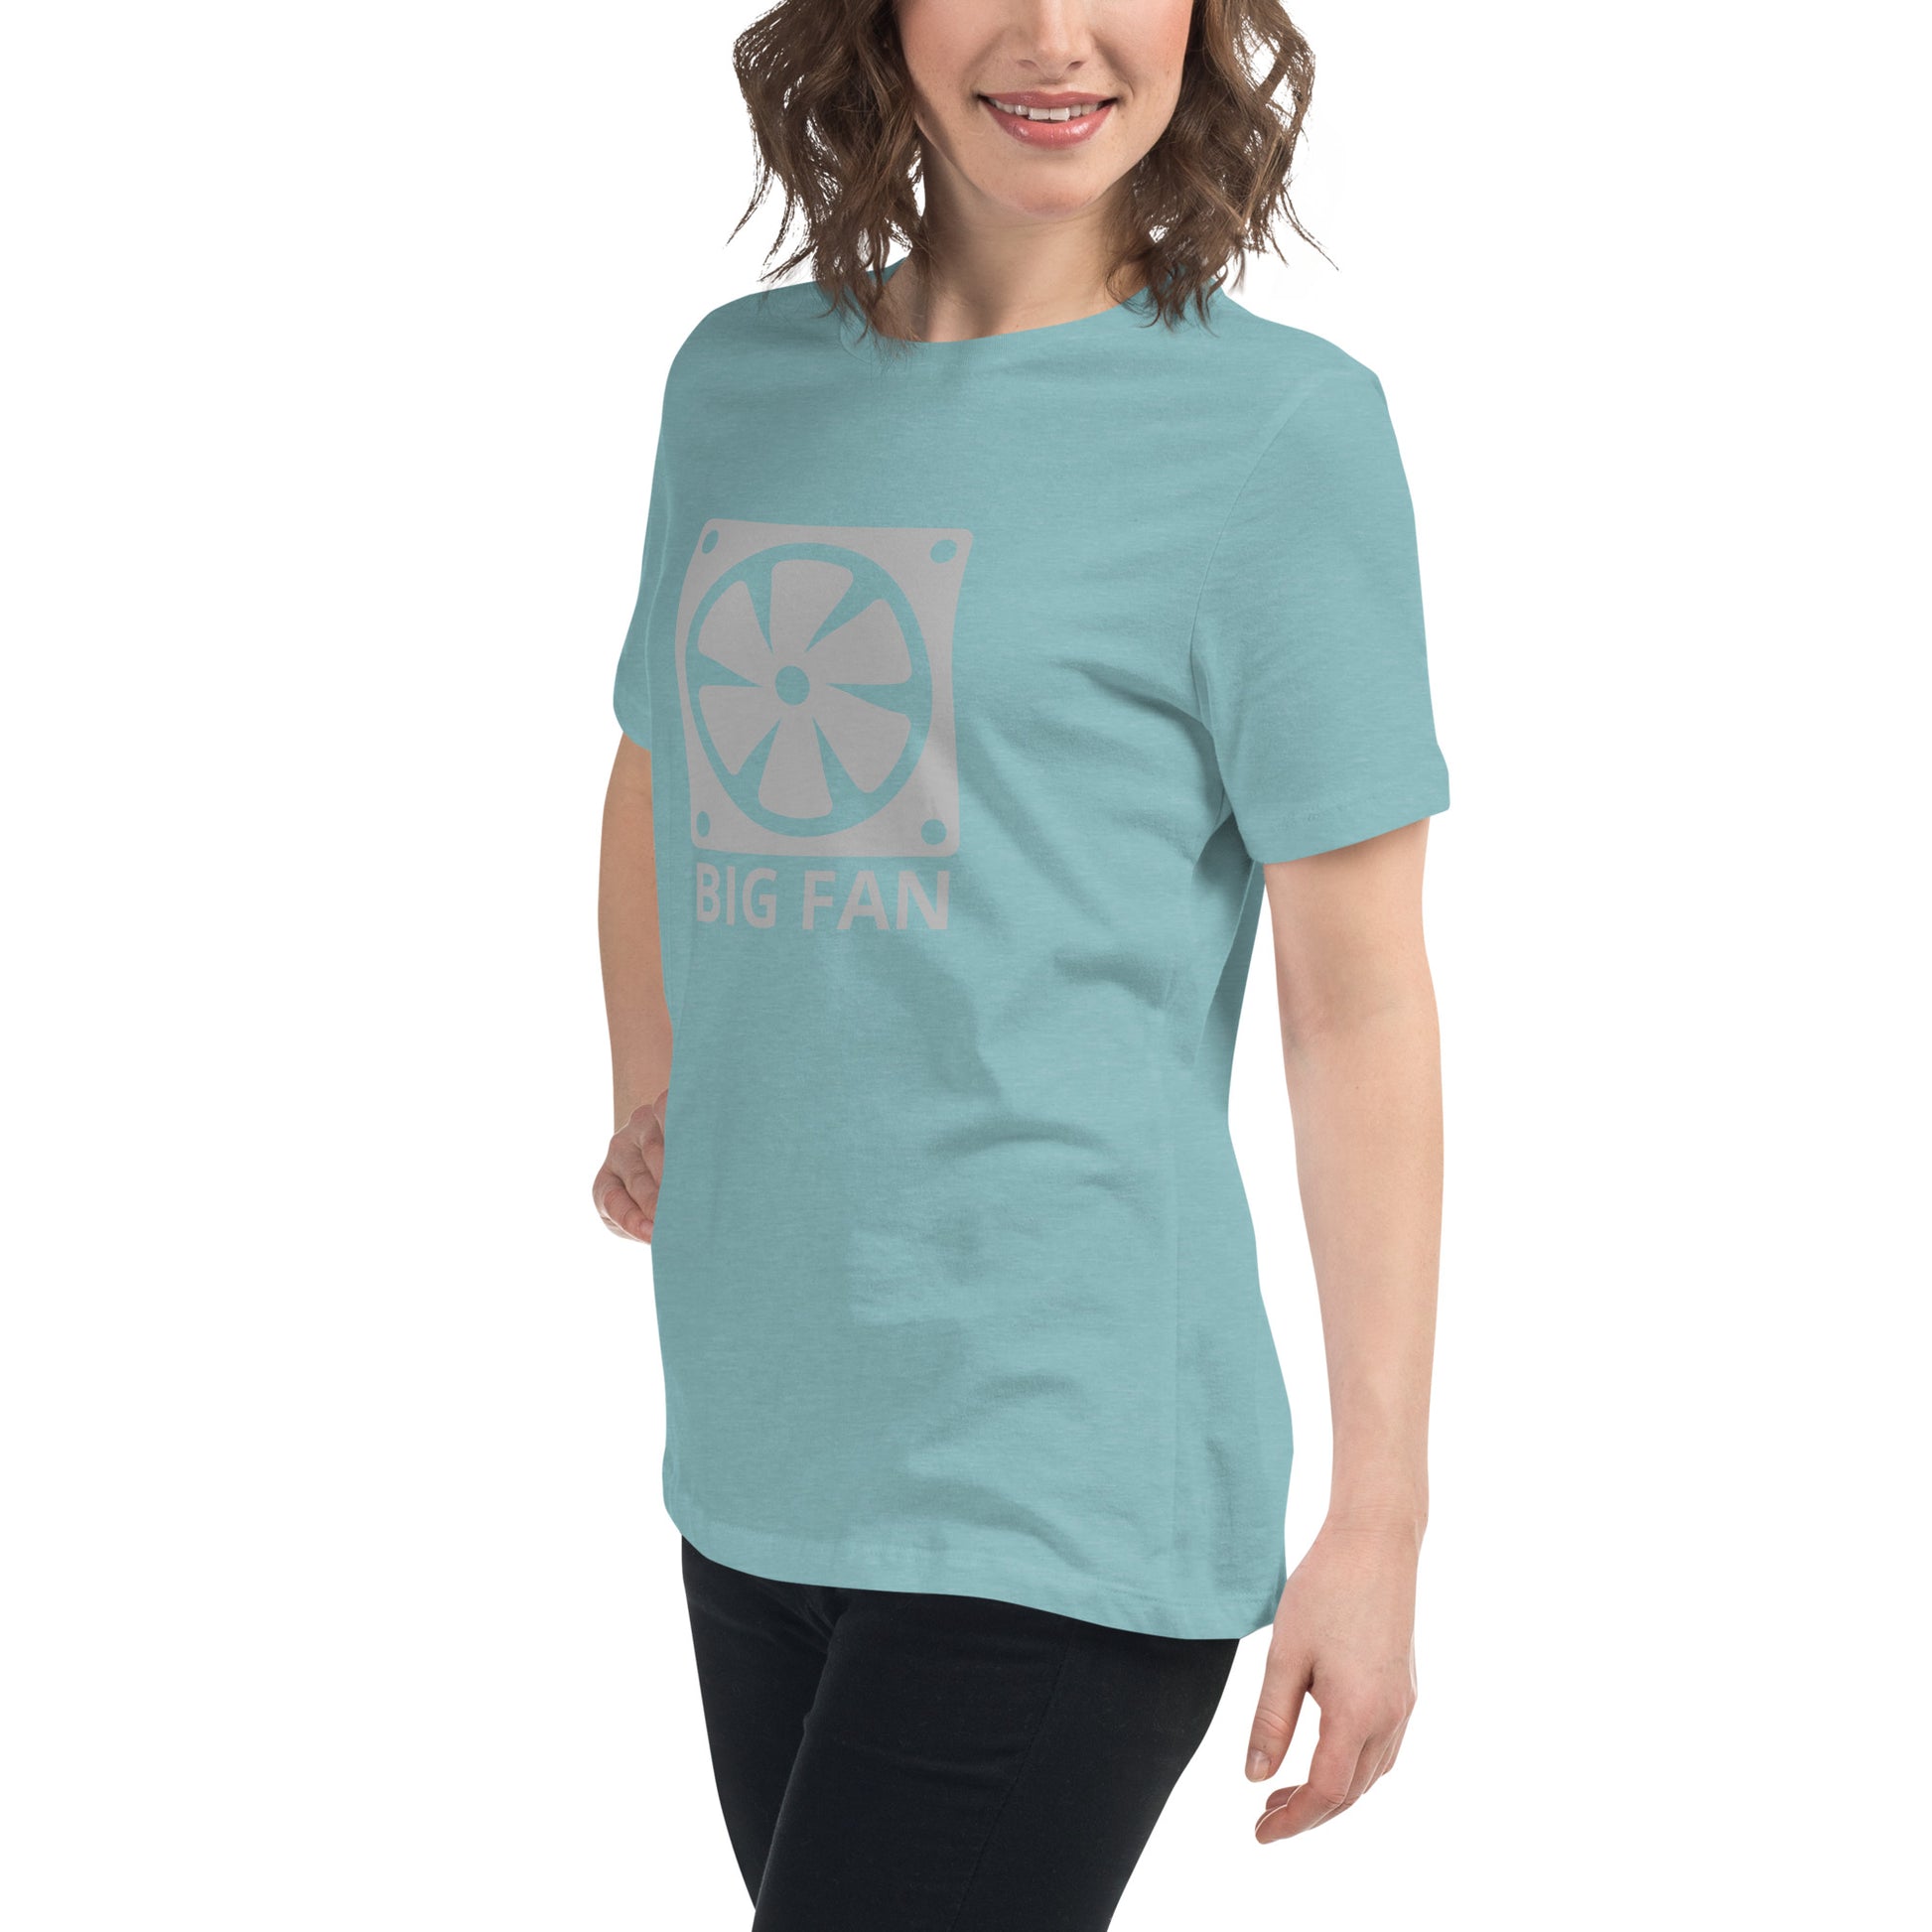 Women with blue lagoon t-shirt with image of a big computer fan and the text "BIG FAN"